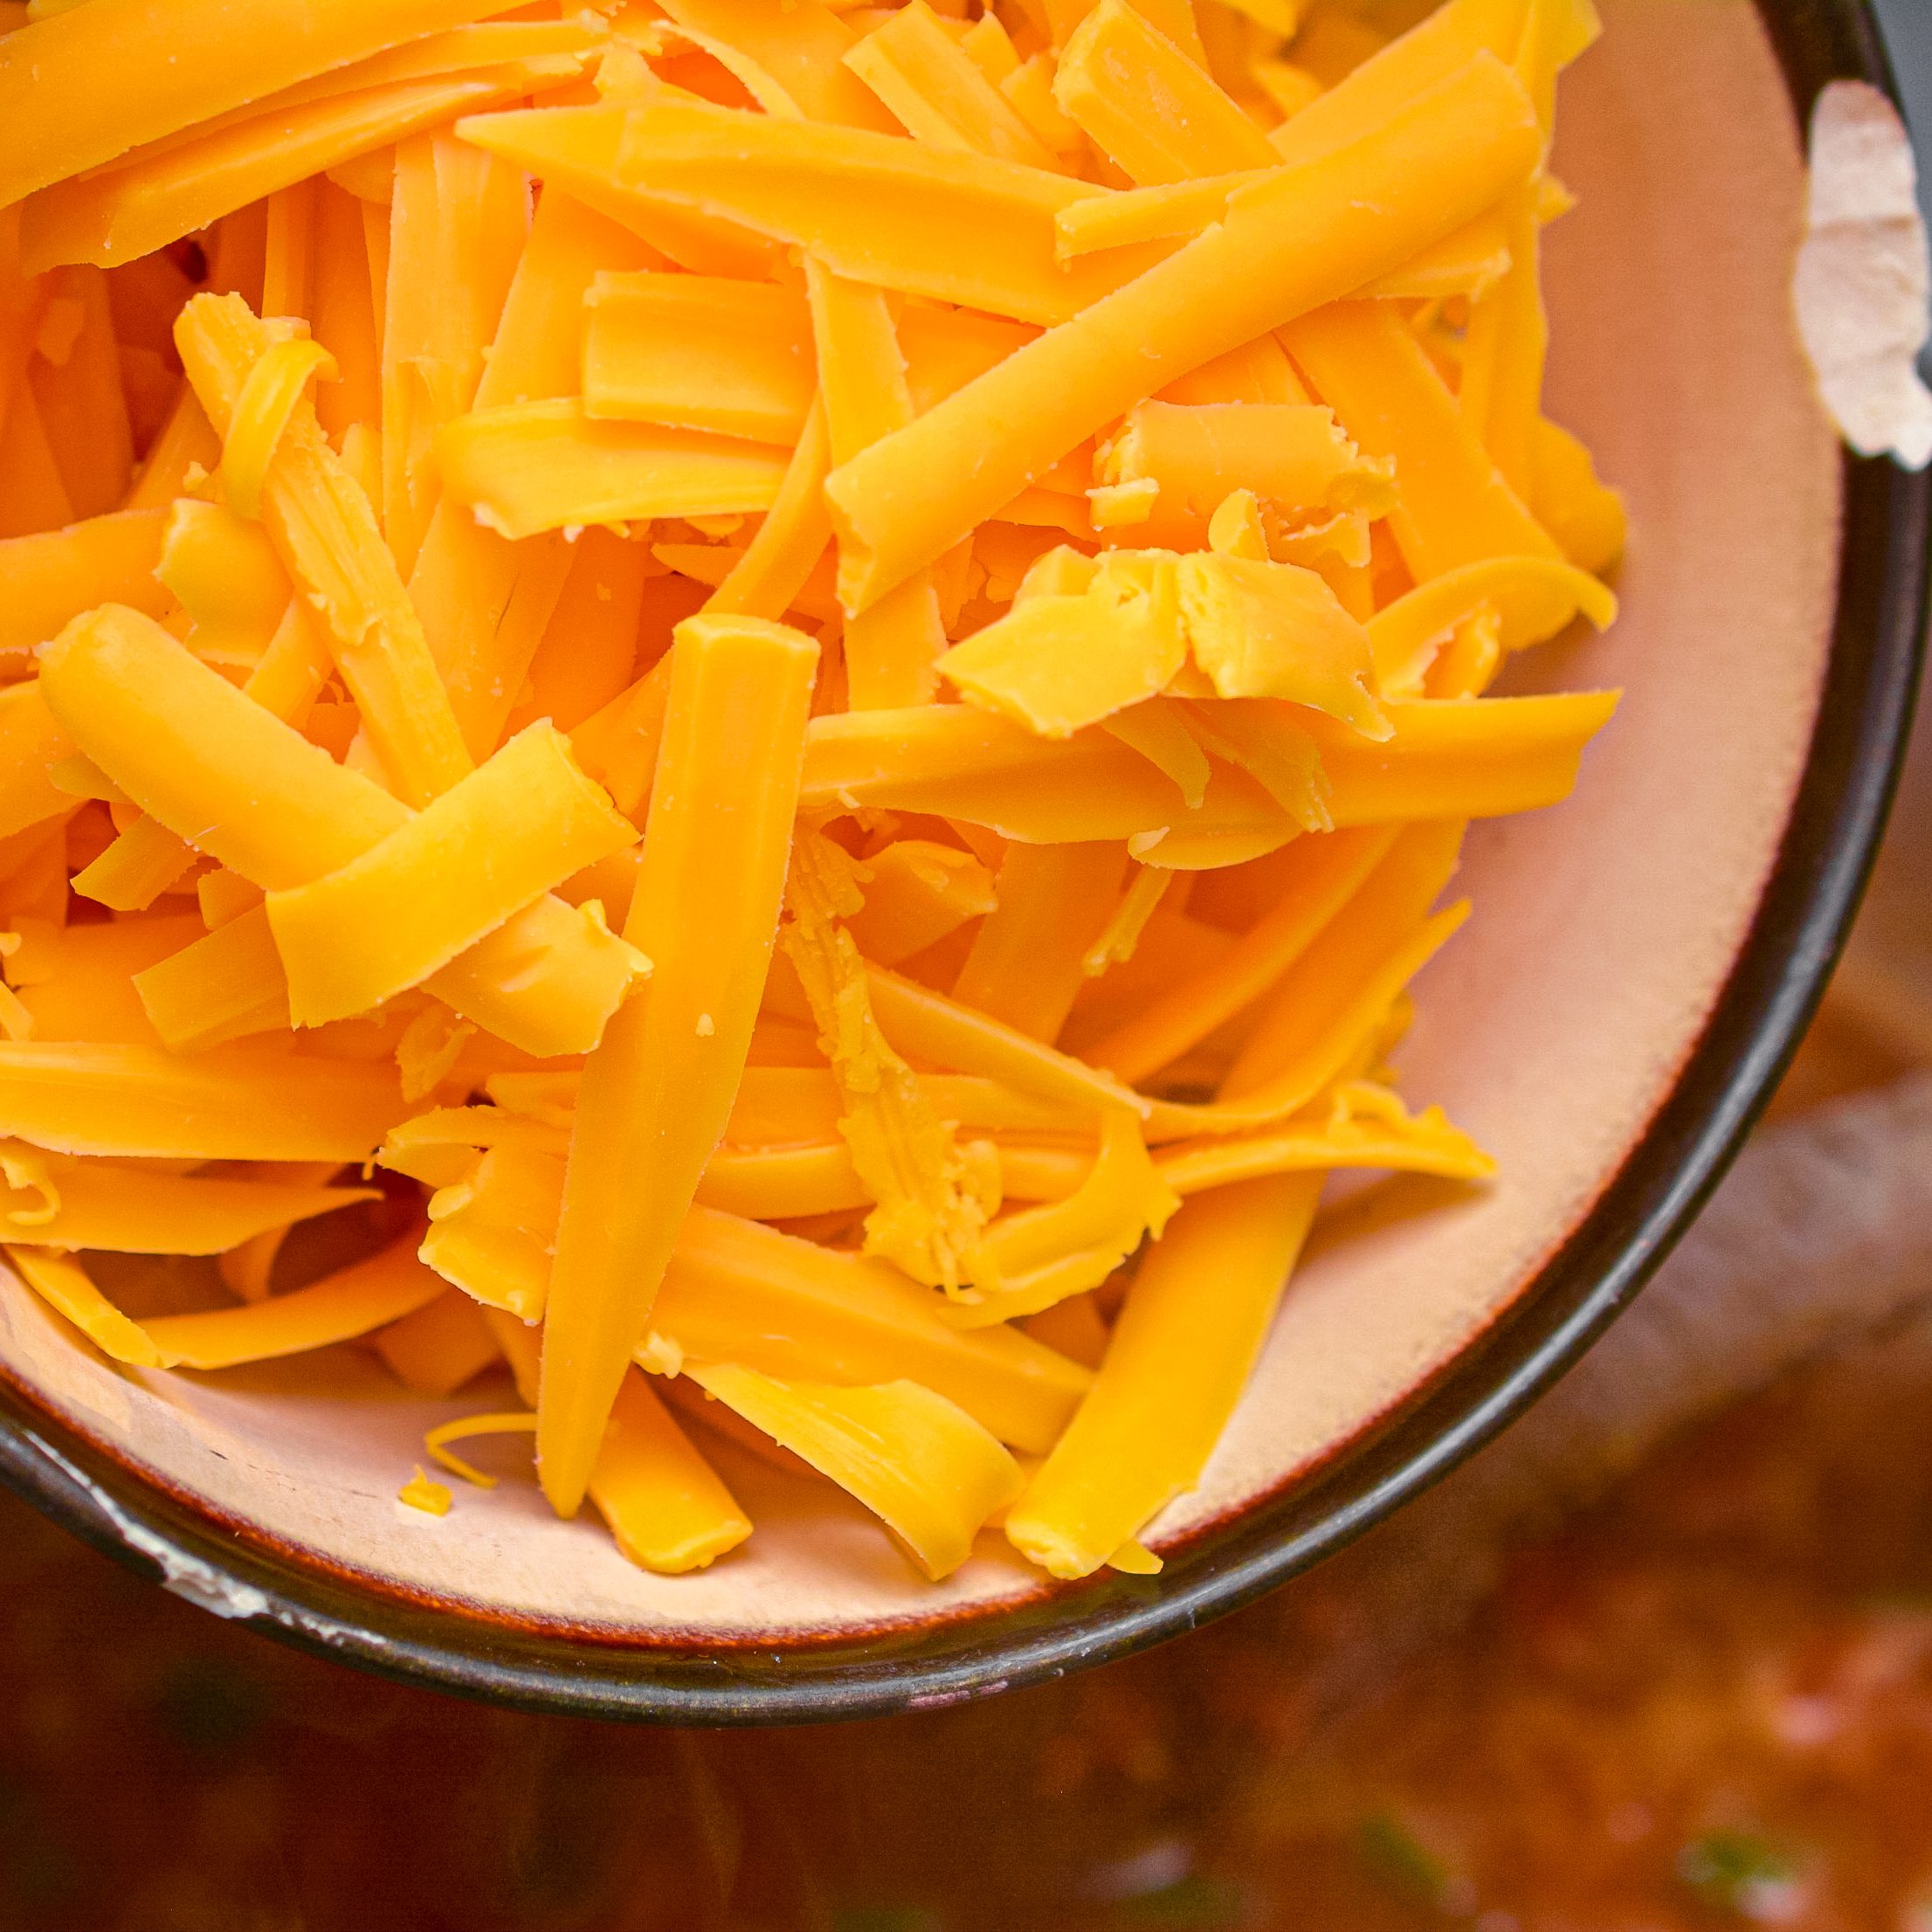 Stir in 2 cups of shredded cheddar cheese, and stir until it is completely melted.